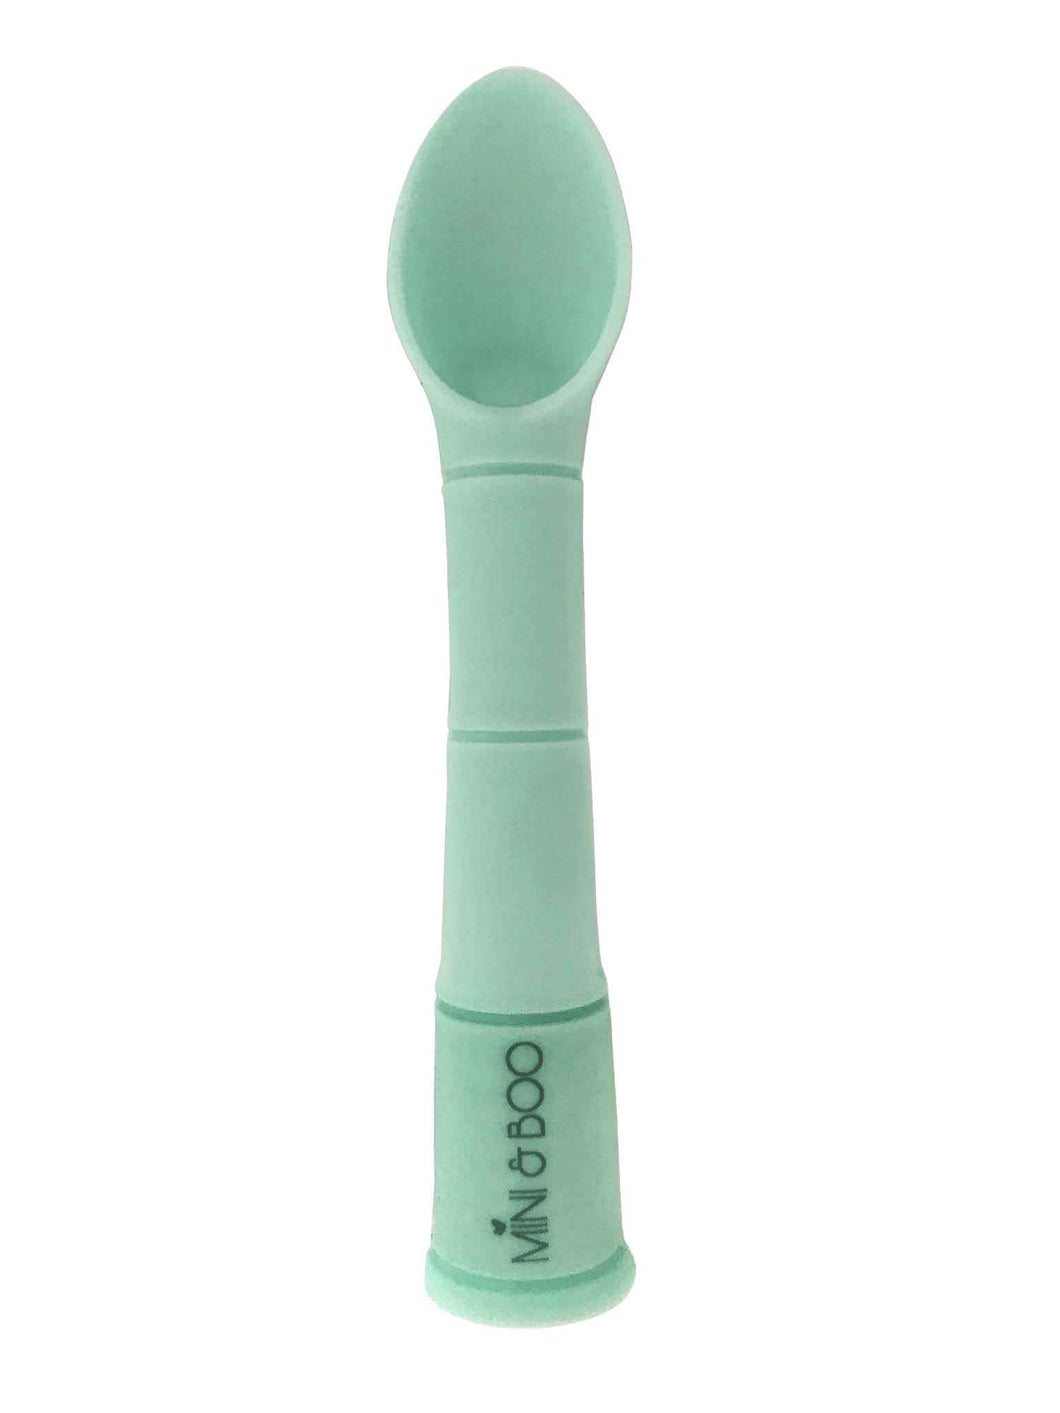 Silicone Teething Spoons (narrow tip) - Mint Green